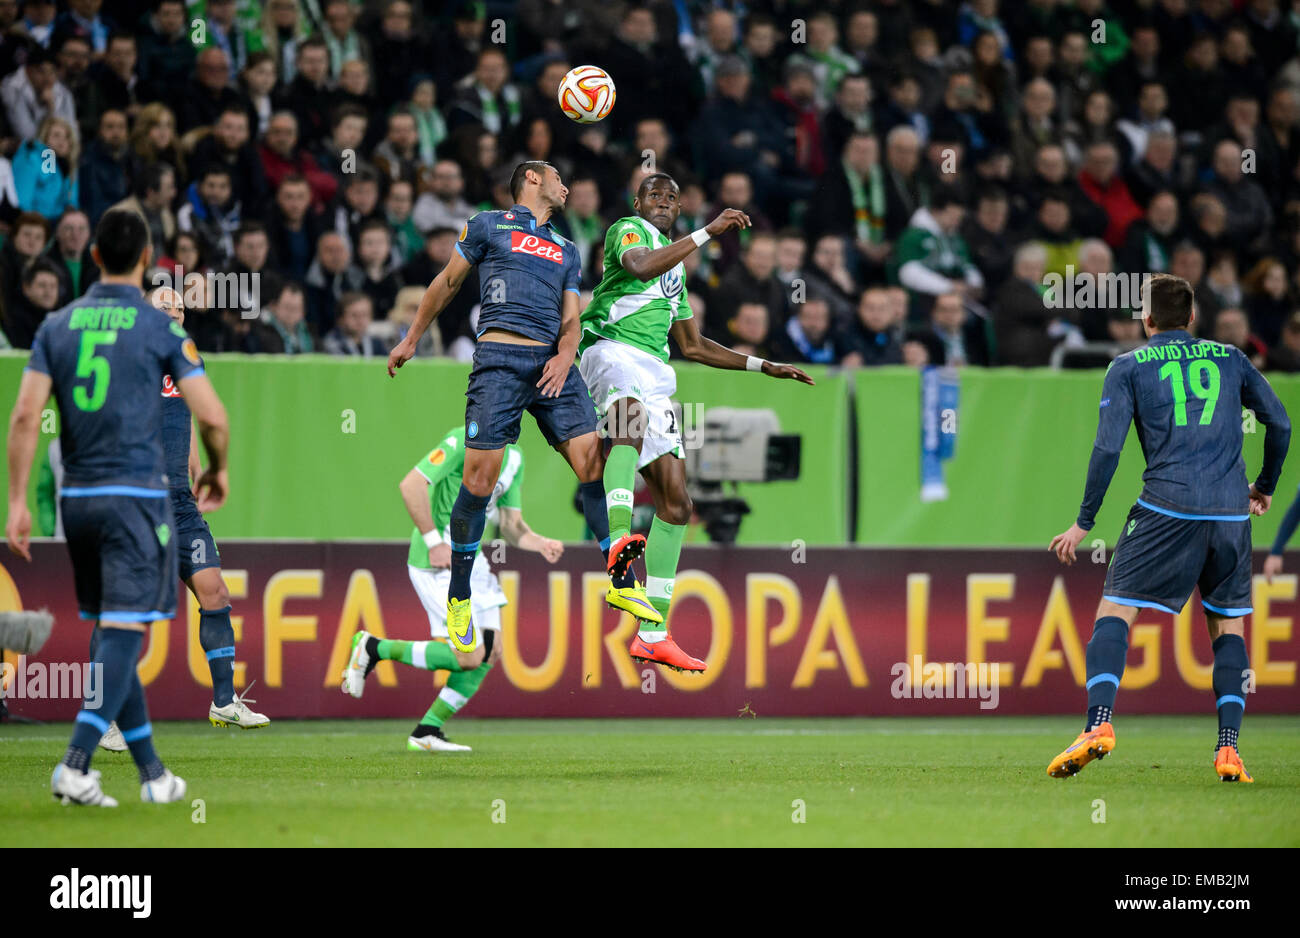 Wolfsburg's Josuha Guilavogui (R) and Napoli's Faouzi Ghoulam in action during the UEFA Europa League quarter final match VfL Wolfsburg vs SSC Napoli in Wolfsburg, Germany, 16 April 2015. Photo: Thomas Eisenhuth/dpa - NO WIRE SERVICE - Stock Photo